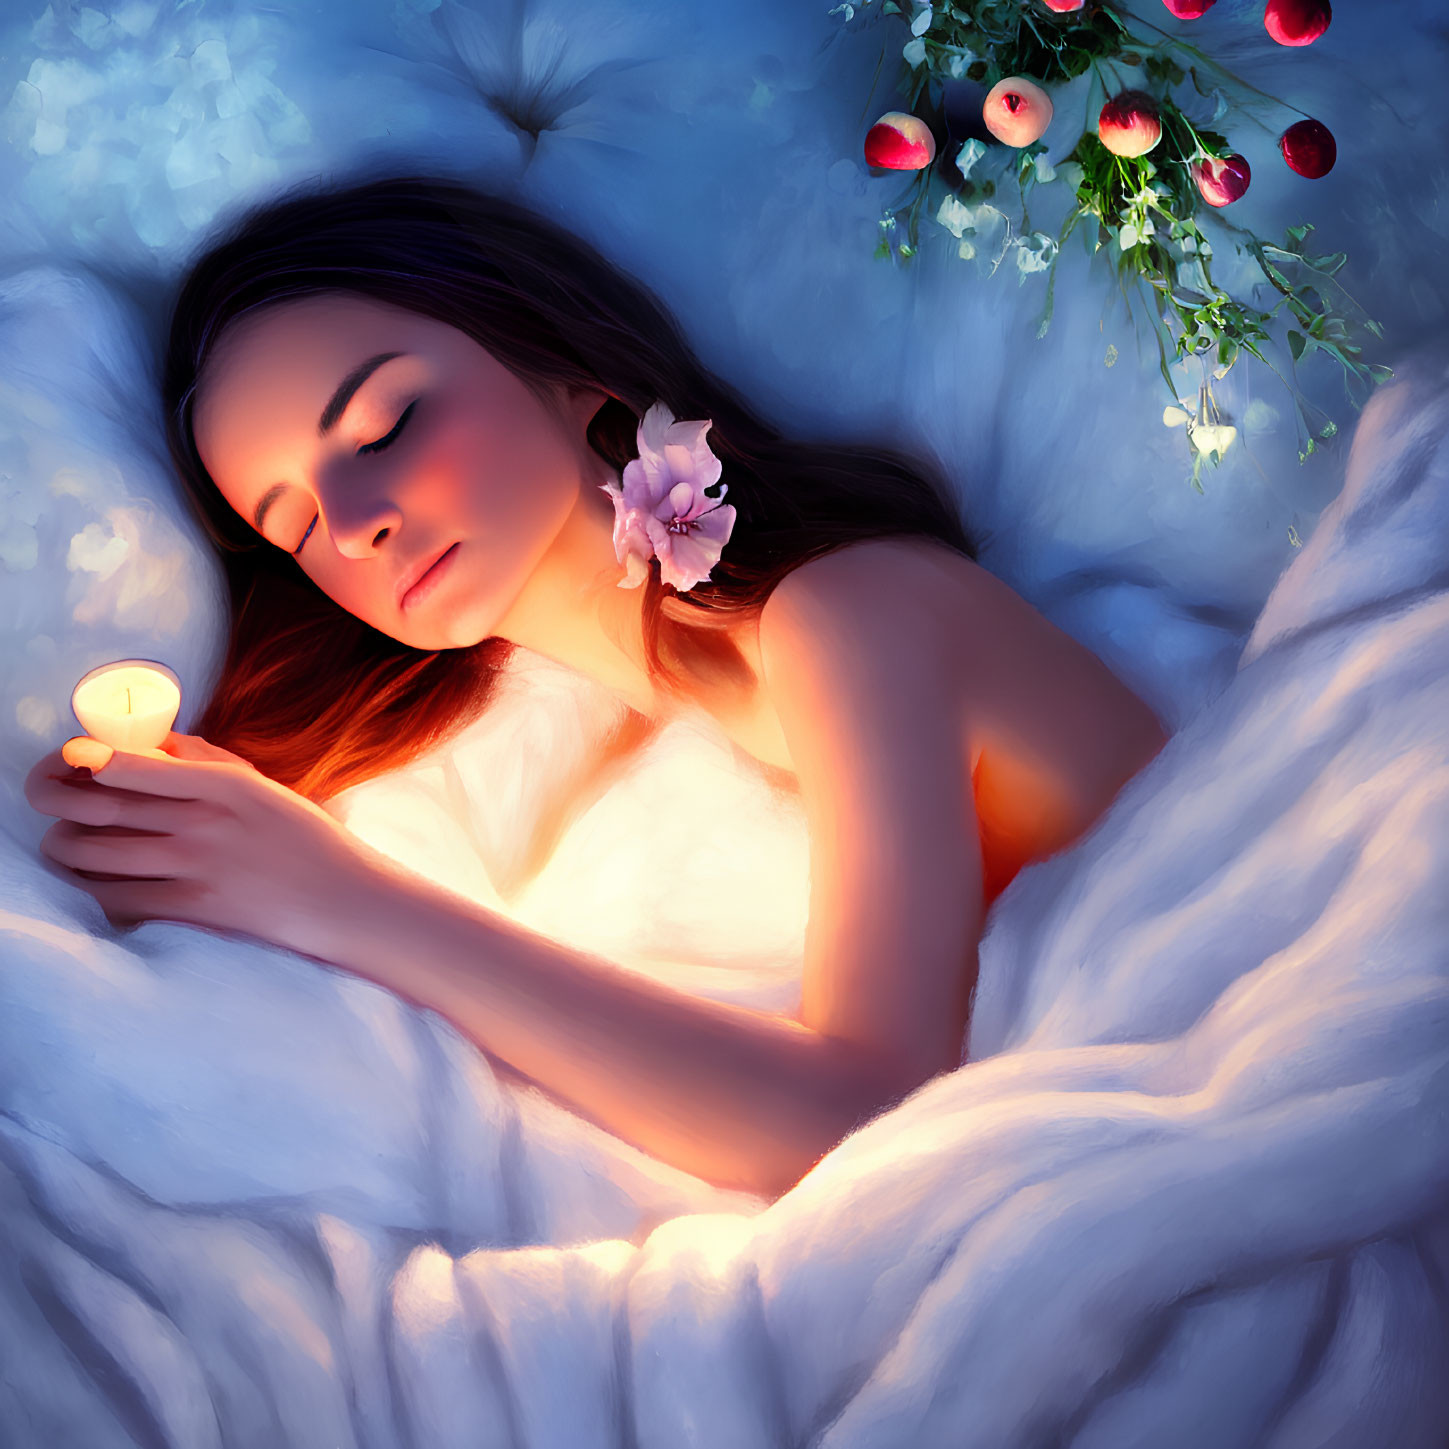 Woman sleeping with candle, blue sheets, flowers, and red apples.